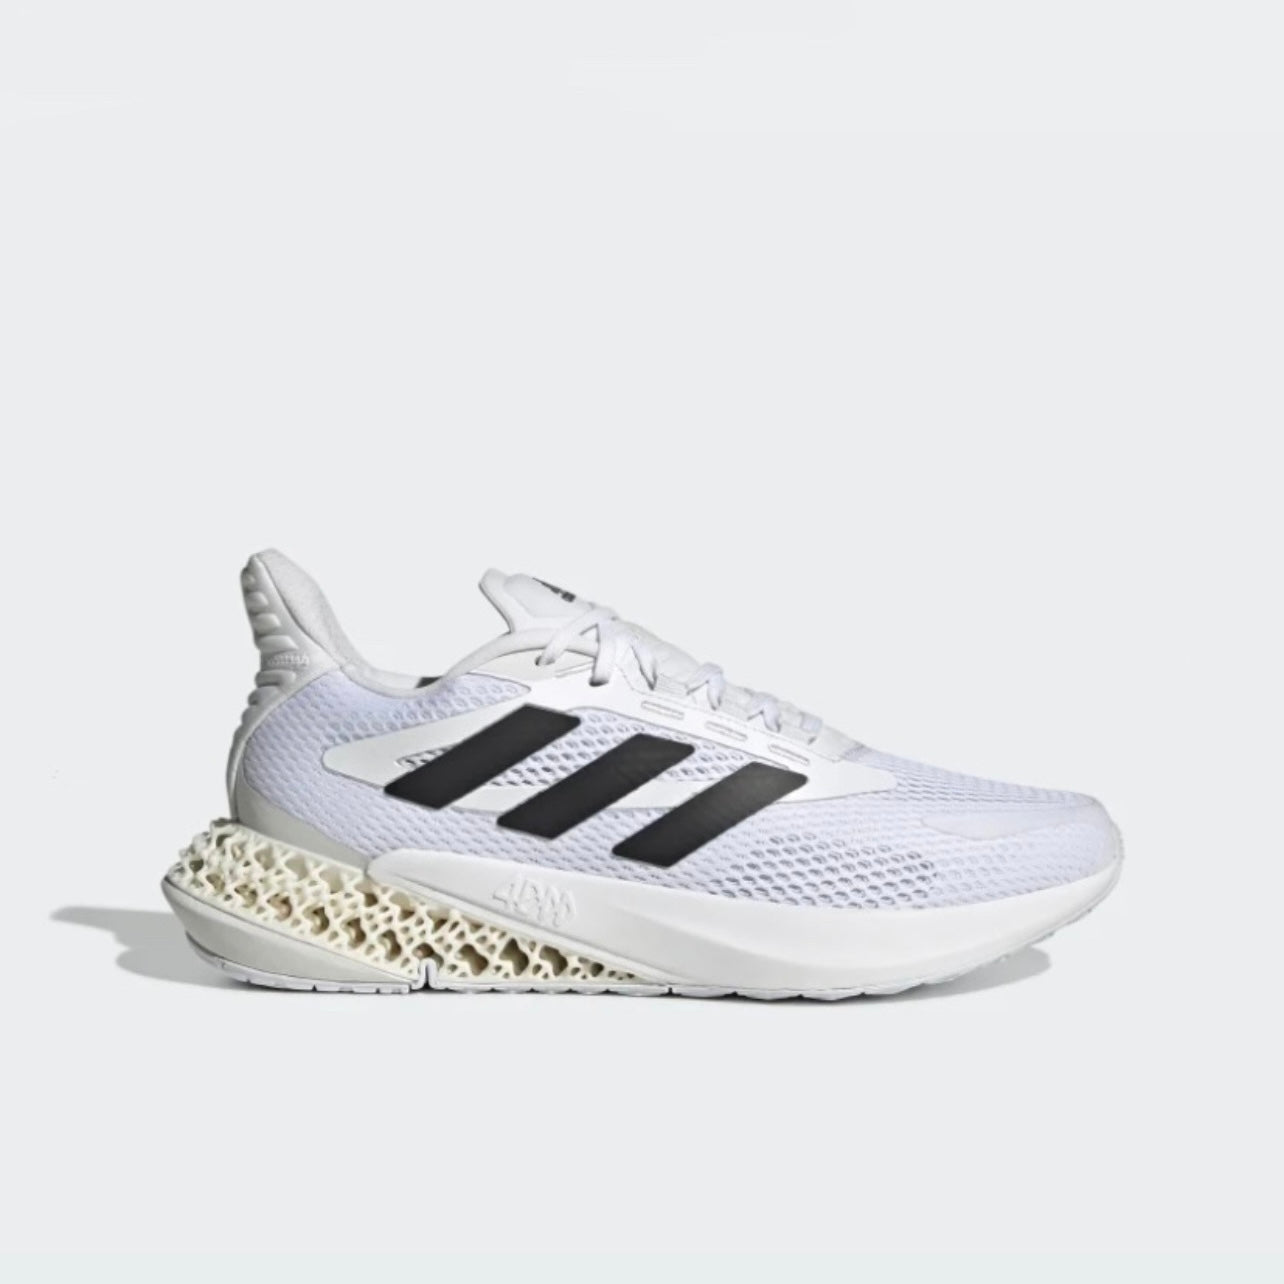 Adidas 4D sneakers for men in white